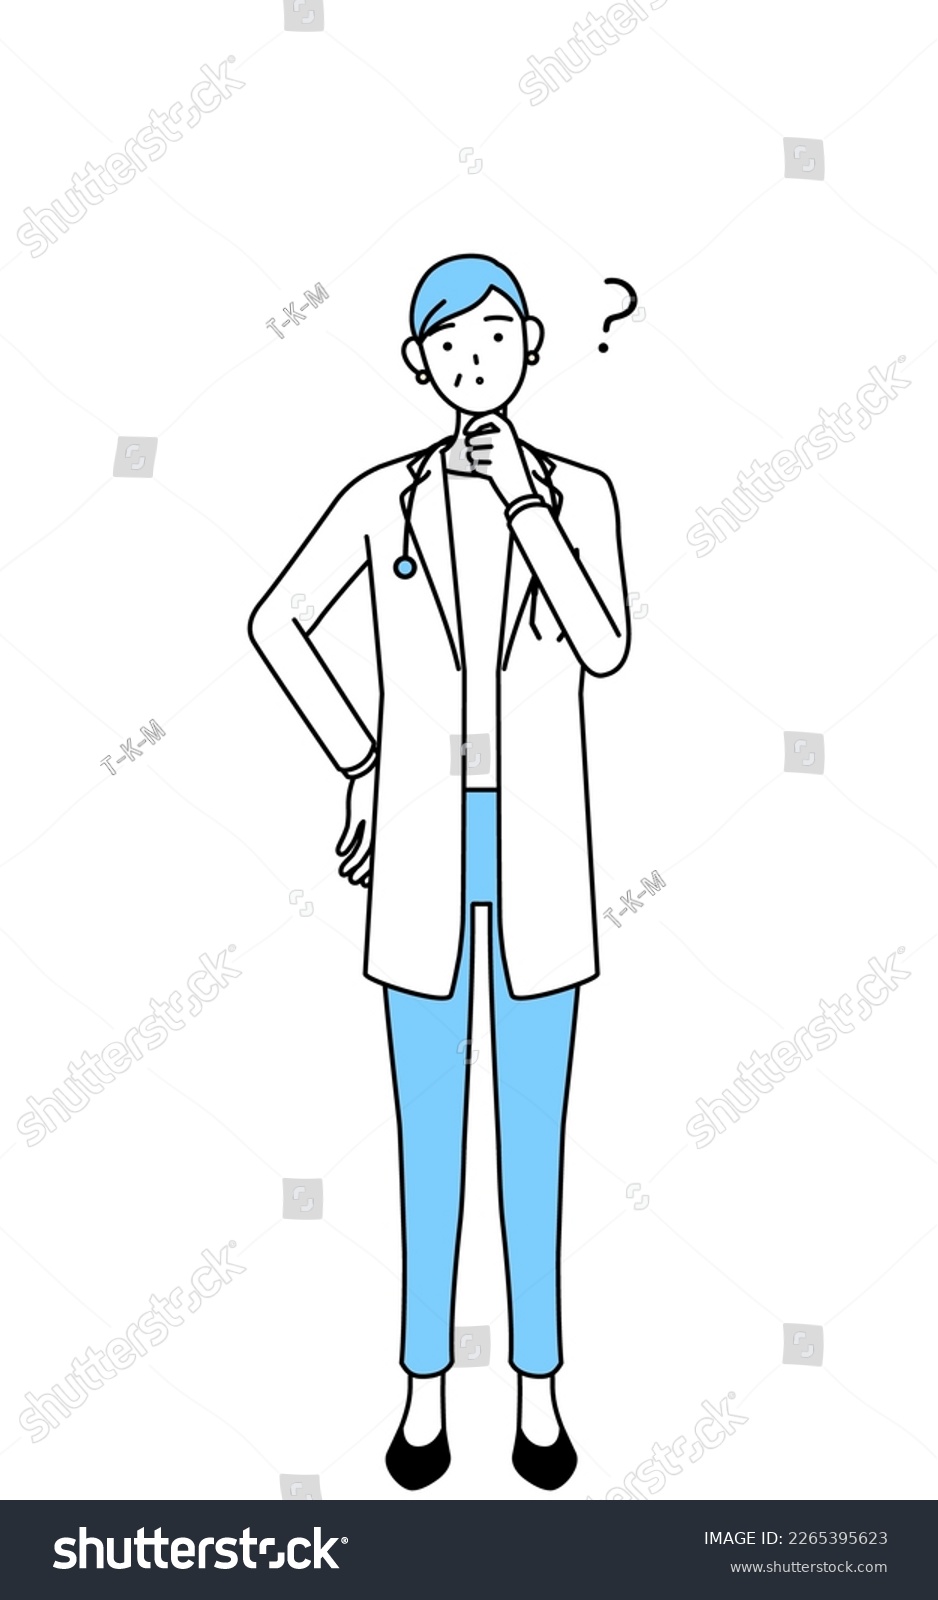 SVG of Female doctor in white coats with stethoscopes, senior, middle-aged veterans with questions. svg